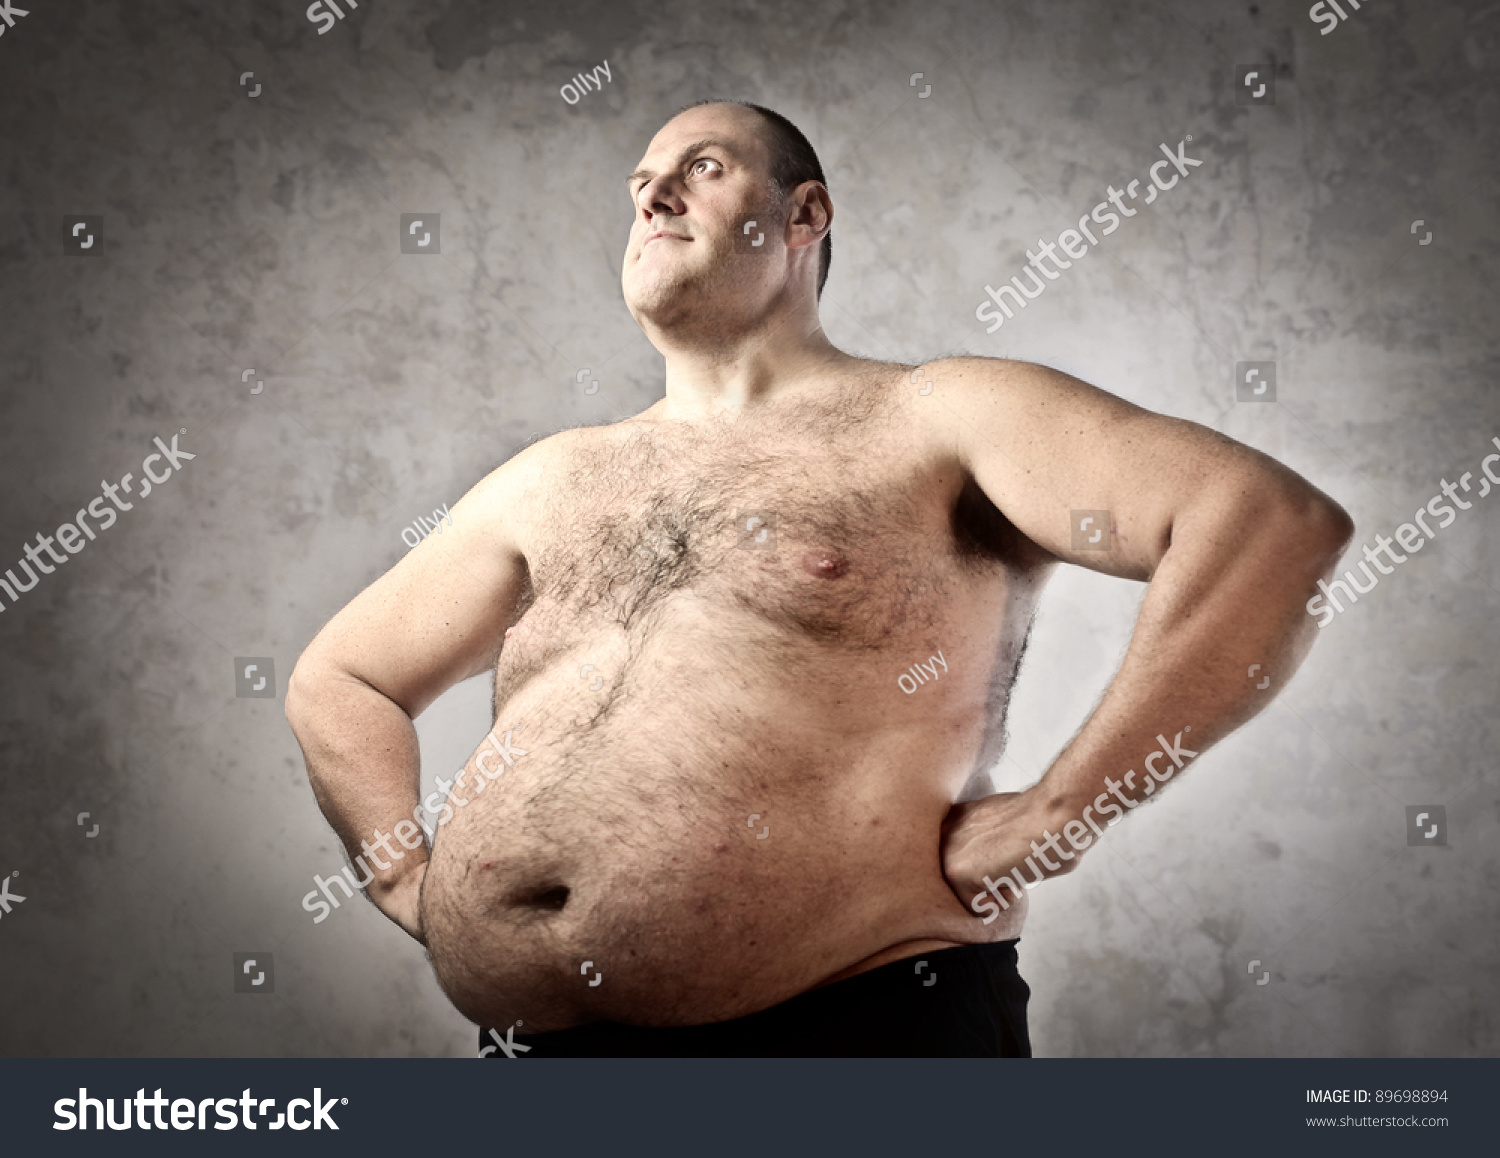 Fat Hairy People 52